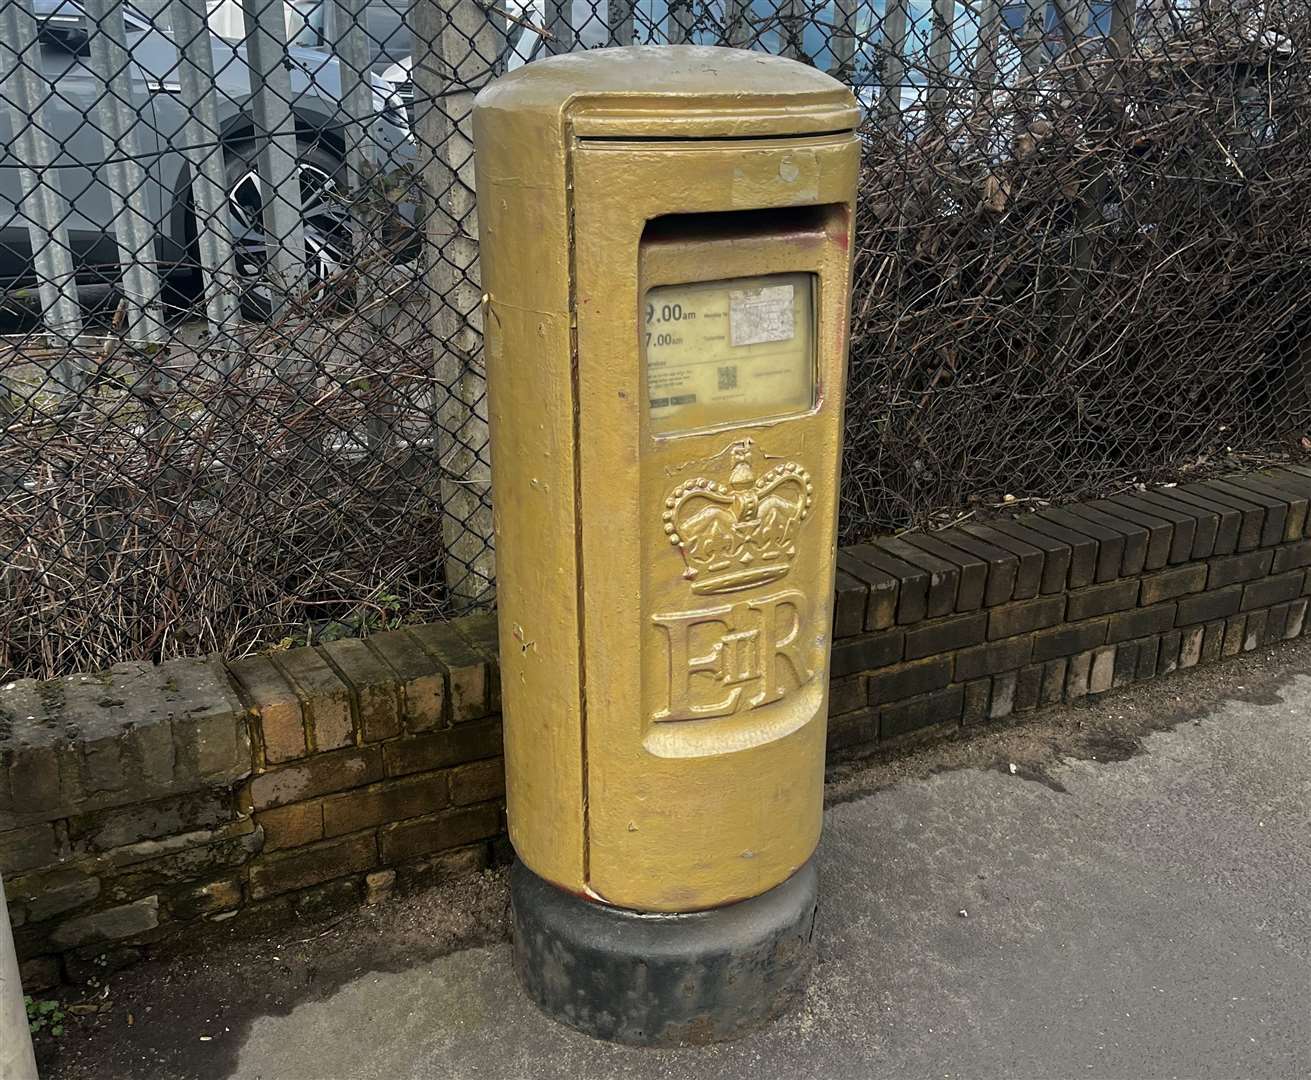 This postbox in Burnham Road, Dartford was painted gold by Whiskin